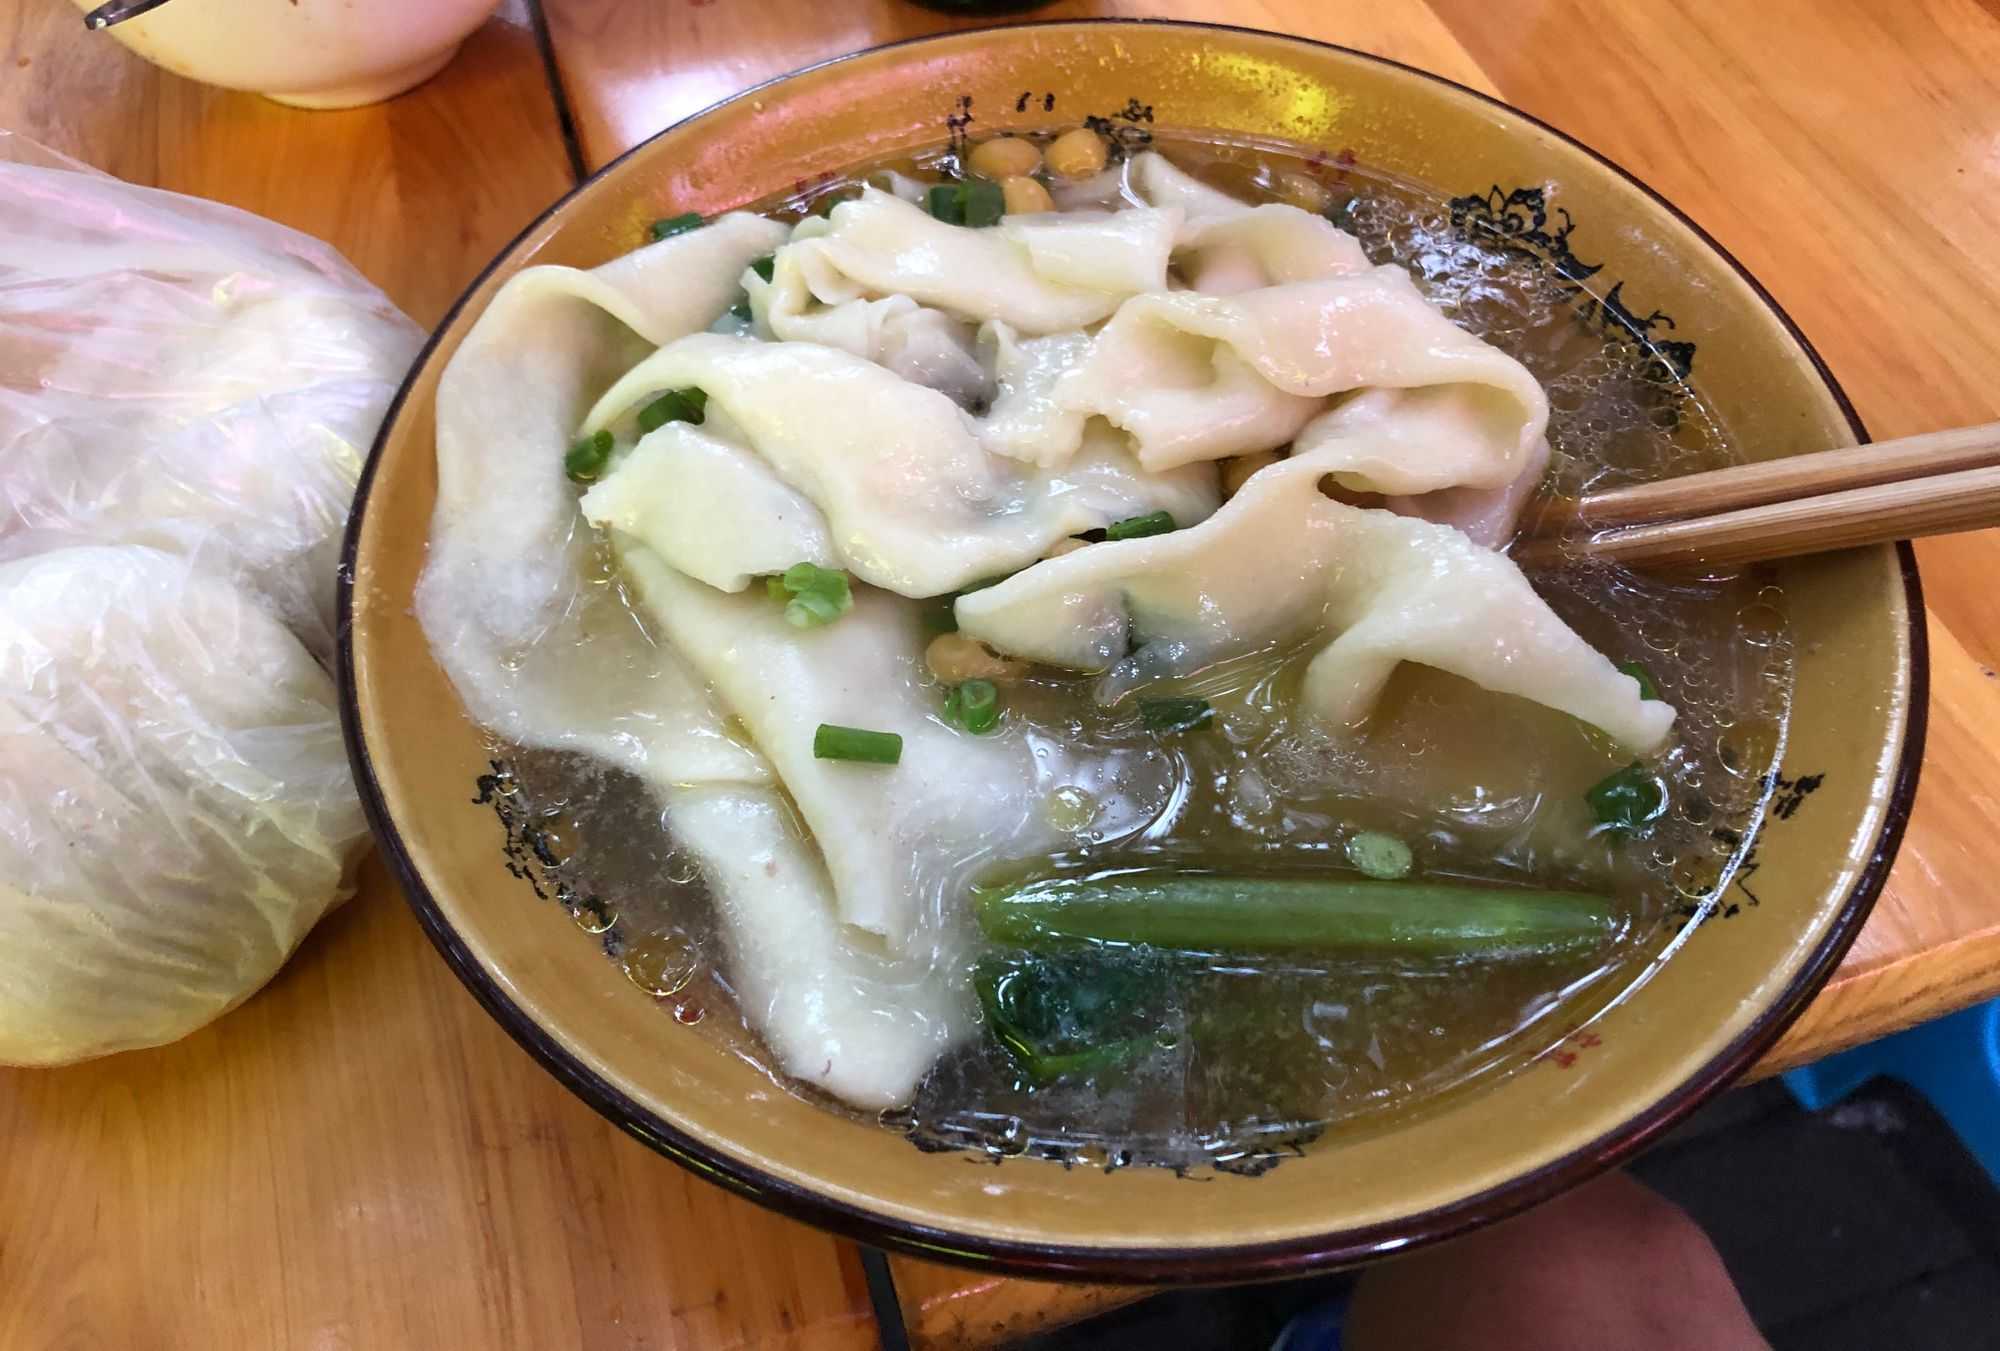 Blanket noodles (铺盖面) (Image by author)